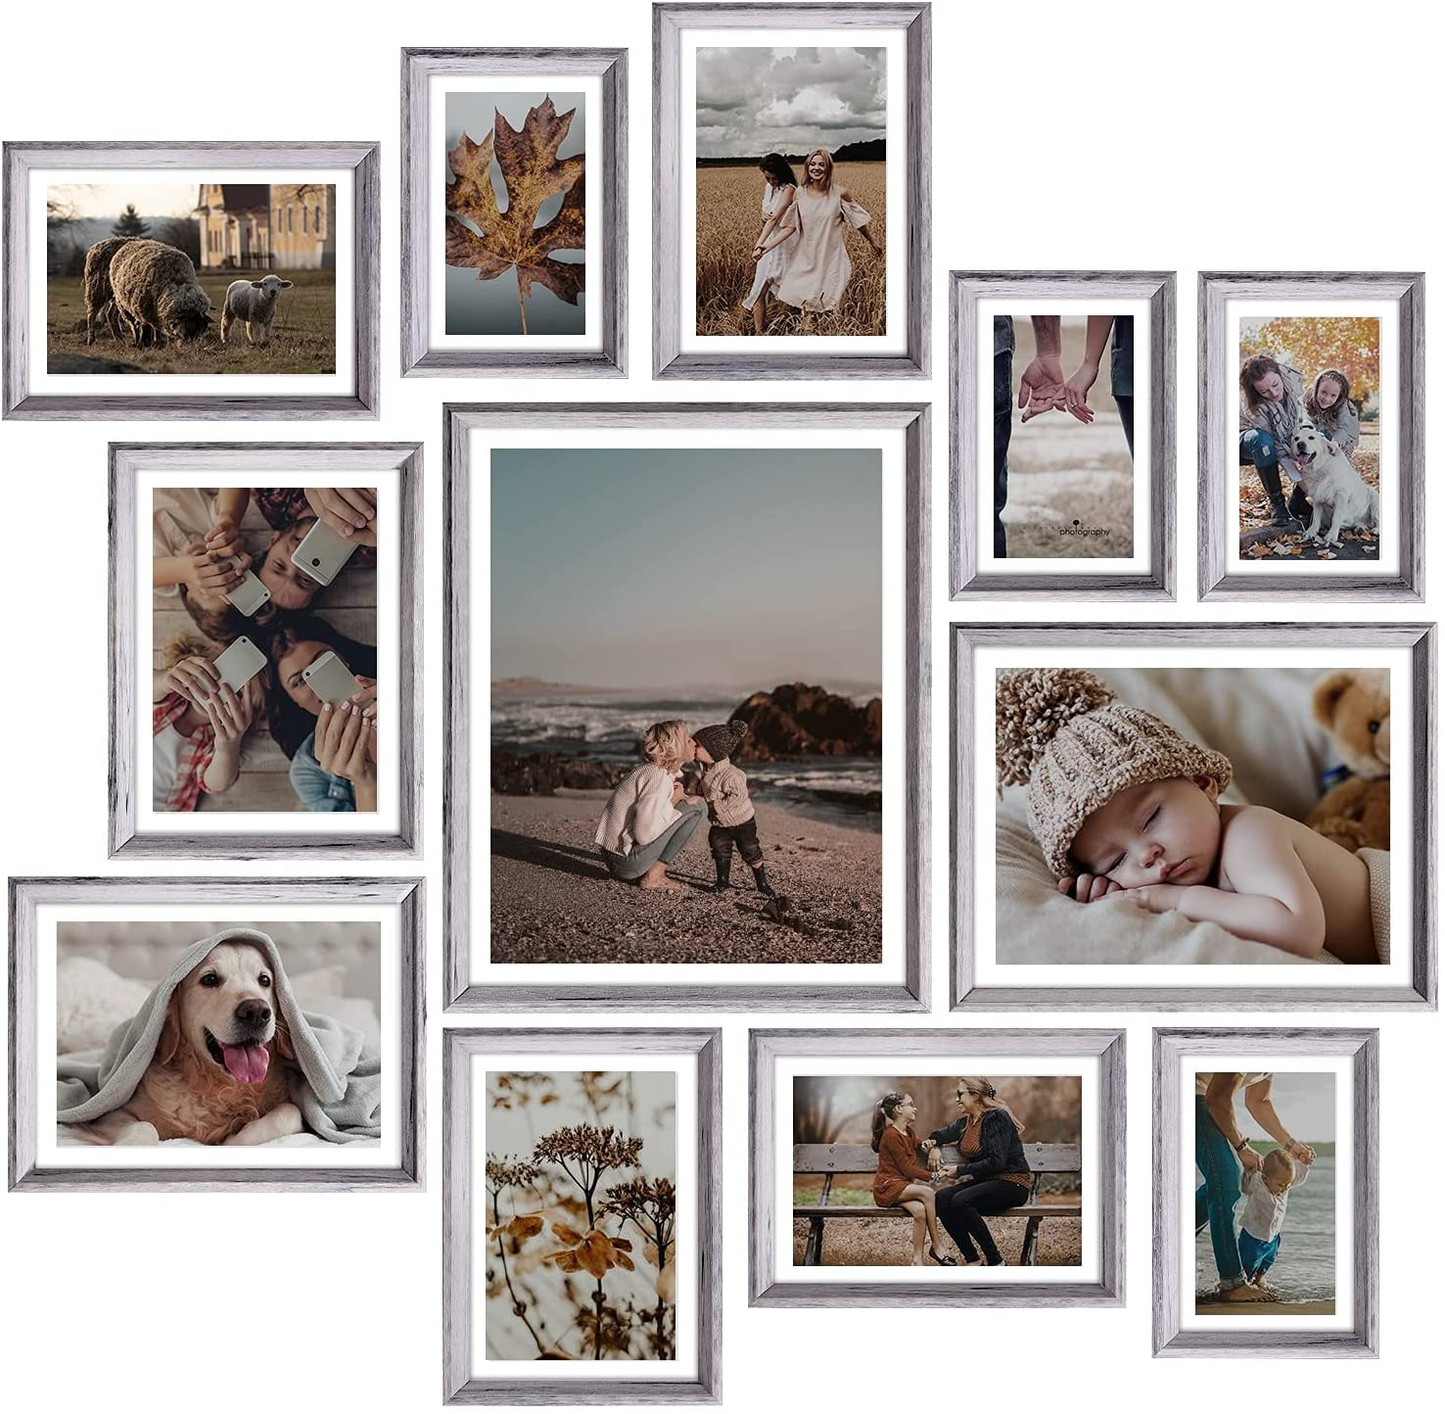 Picture Frames Set Wall Decor - 12 Pcs Photo Frames Collage for Wall or Tabletop Including 4x6 5x7 6x8 8x10 11x14 inch